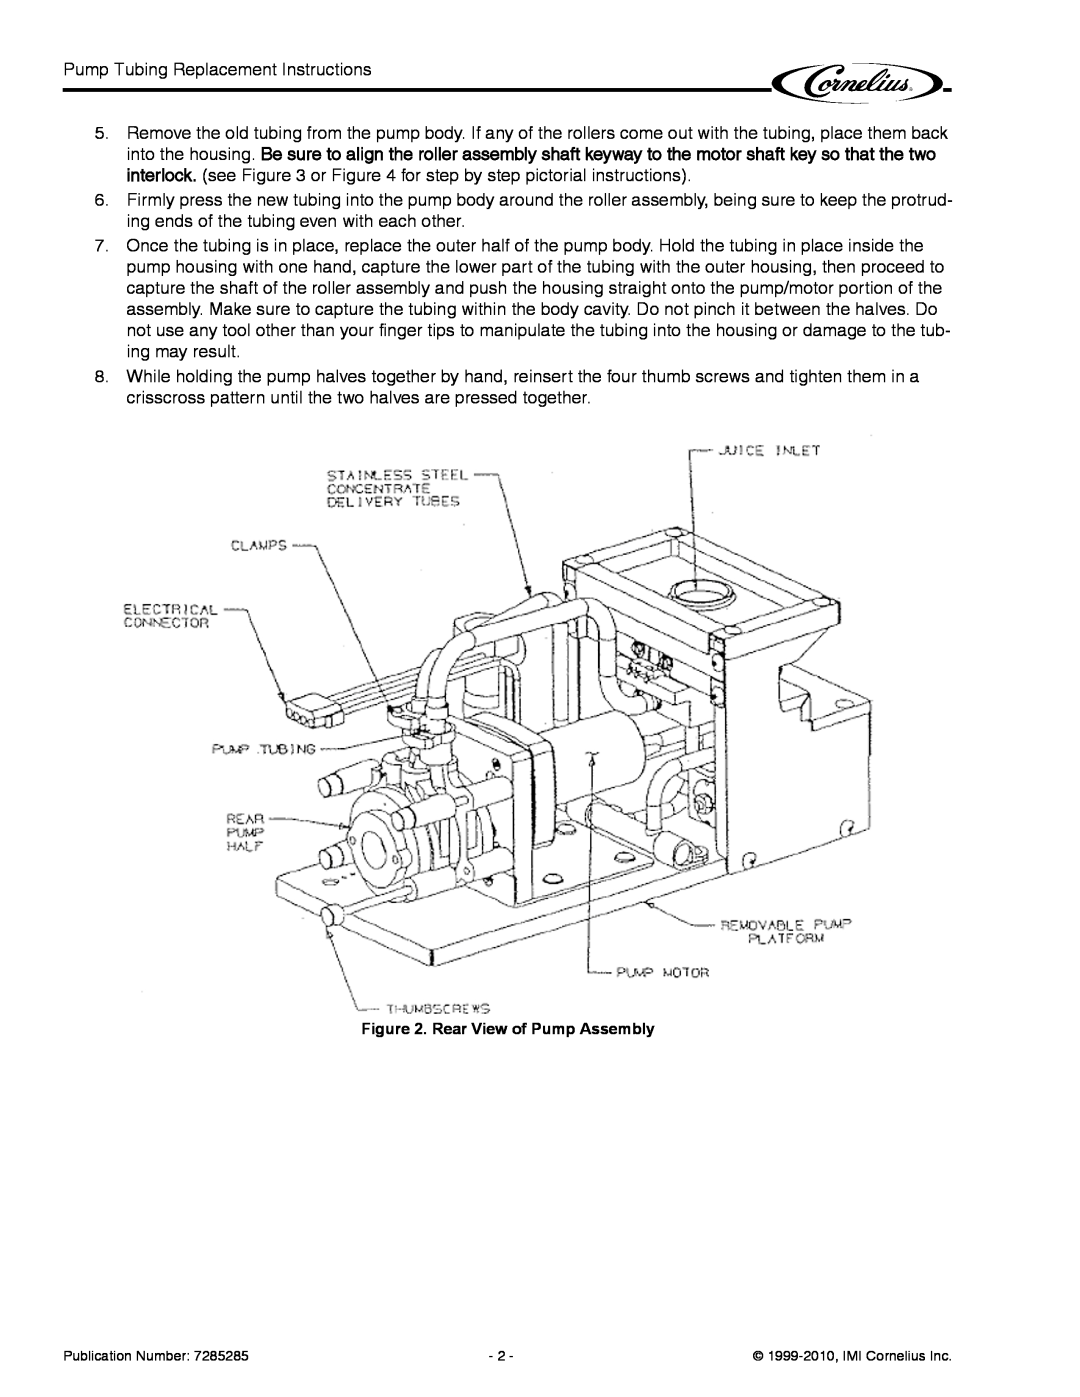 Cornelius 45098 installation instructions Rear View of Pump Assembly 